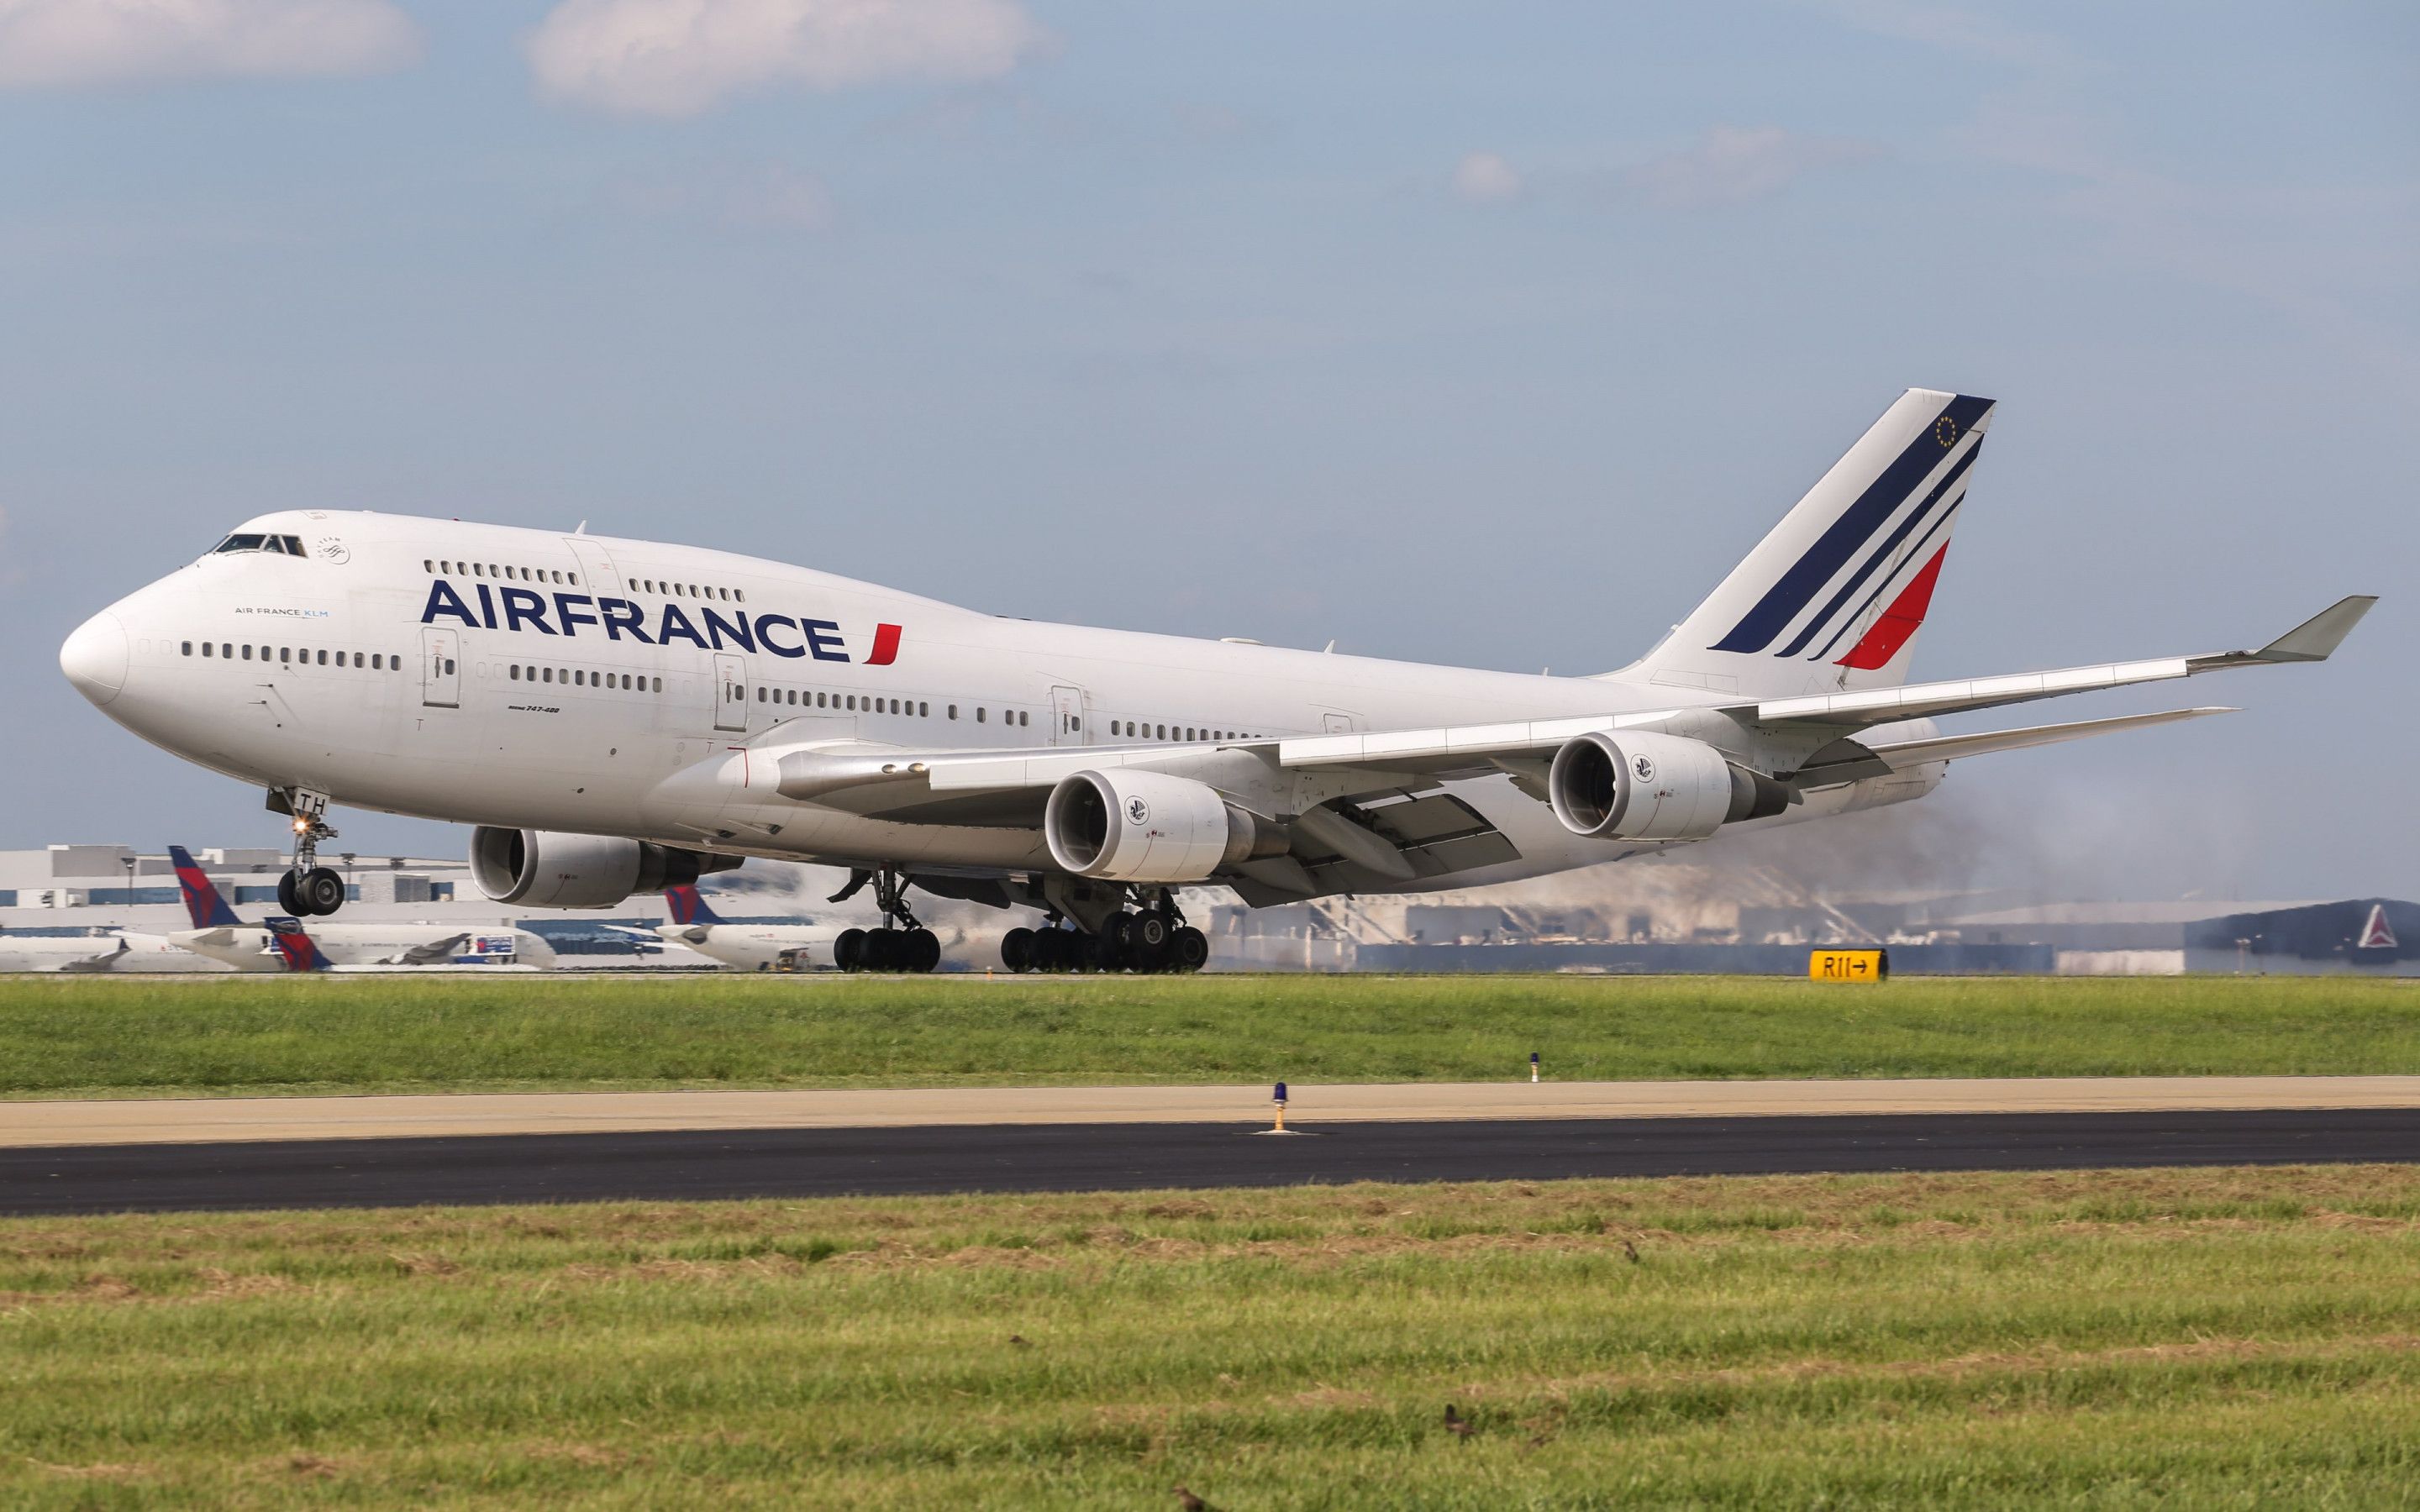 Download wallpaper: Air France Boeing 747 2880x1800